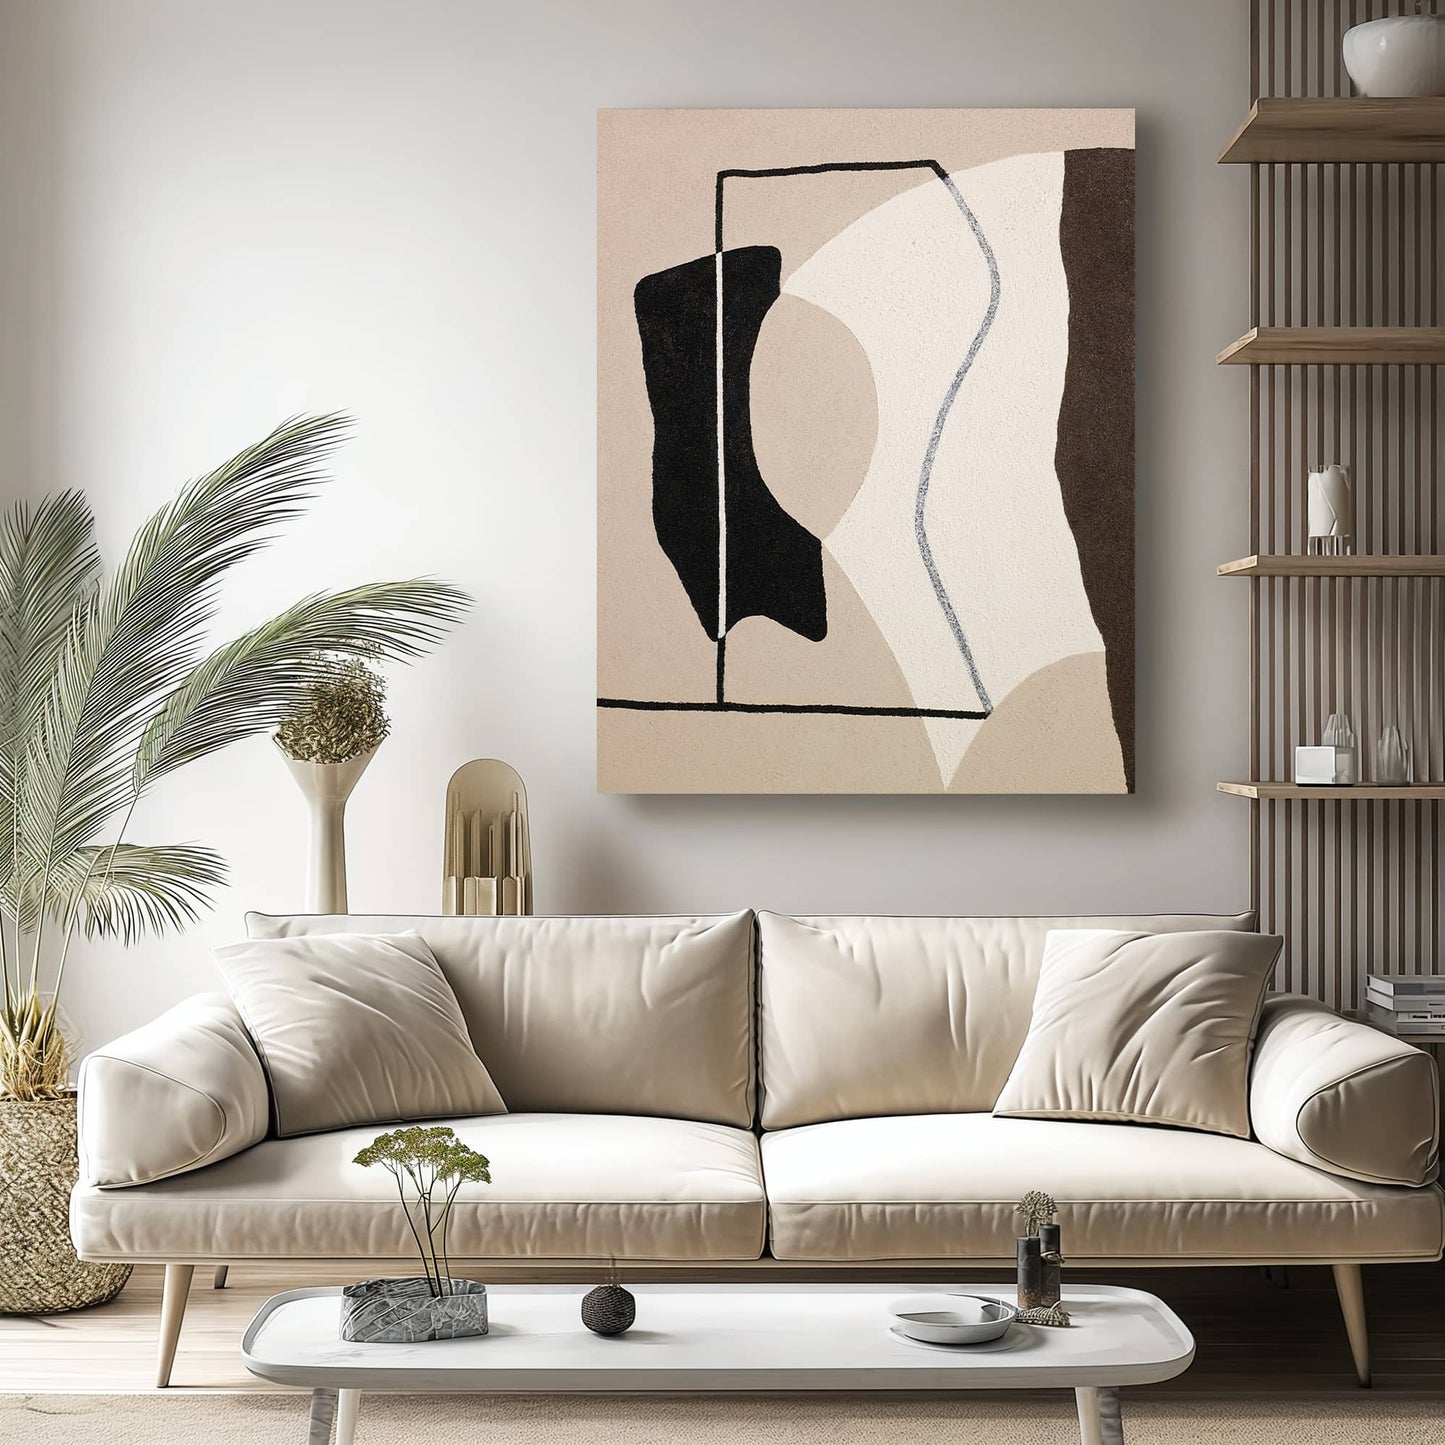 "VACANT STARE: Hand-painted Portrait shaped abstract textured wall art painting depicting an abstract hollow eye, in shades of tan, brown, cream, and white, hanging in the living room."